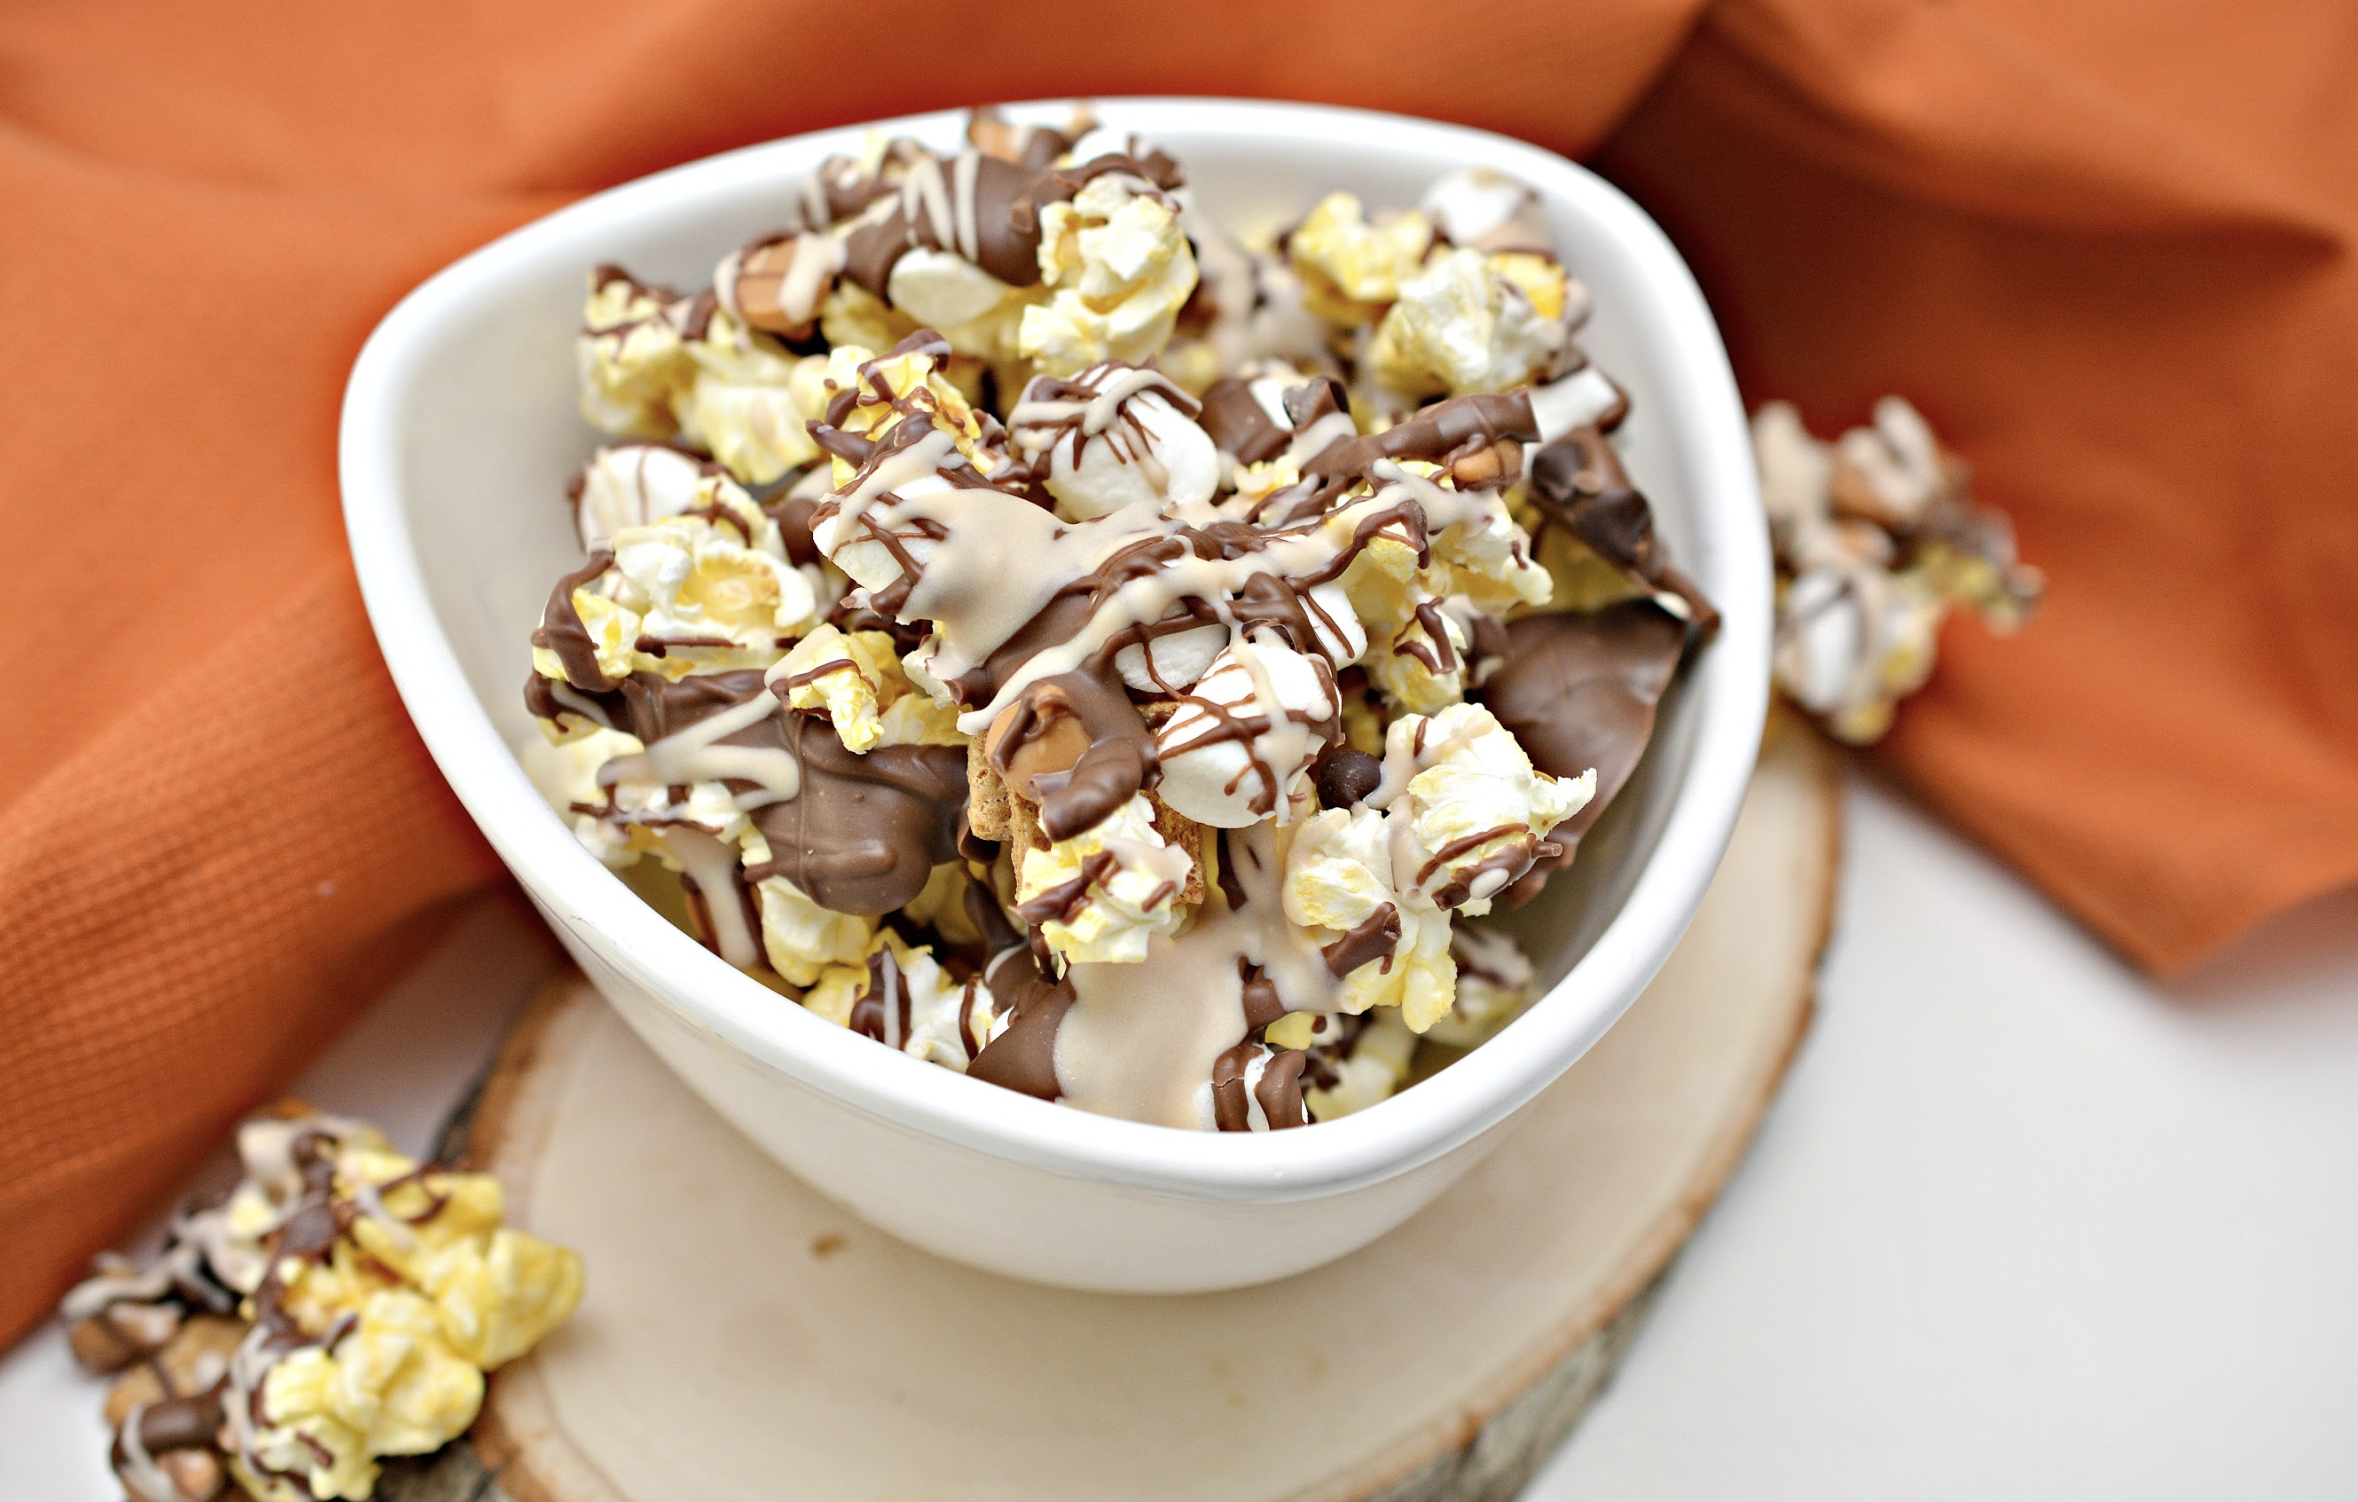 Try this super easy, "no bake" S'mores Caramel Popcorn treat and take a traditional popcorn to a whole new level with the marshmallow-ey chocolate caramel goodness.... mmm... mmm.. good!